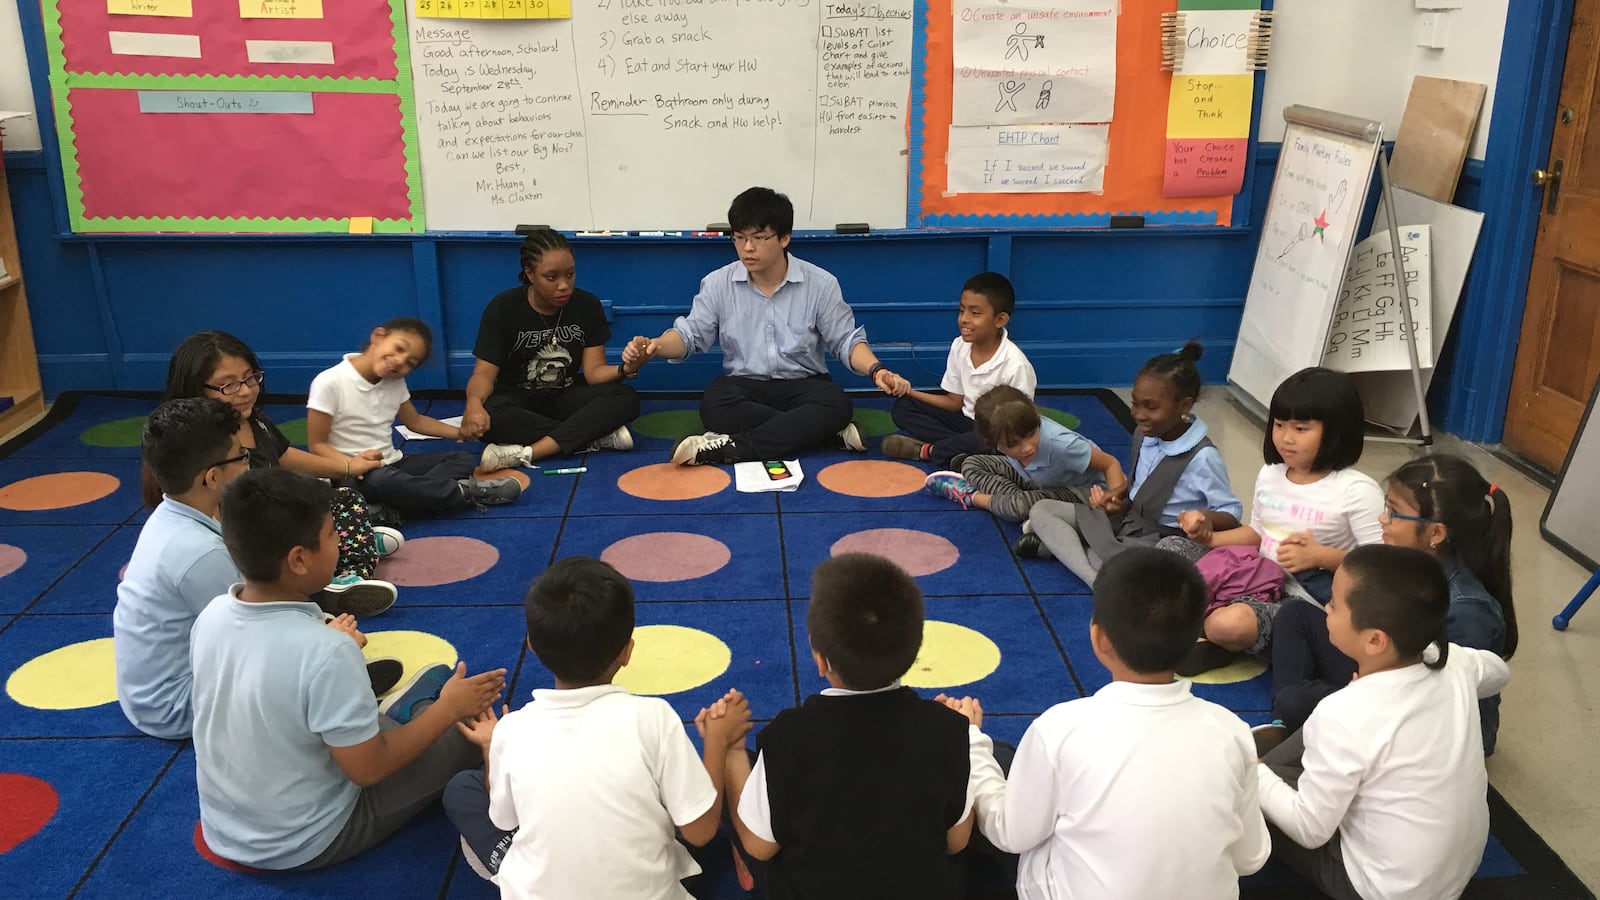 East Harlem Teaching Residents in the classroom.